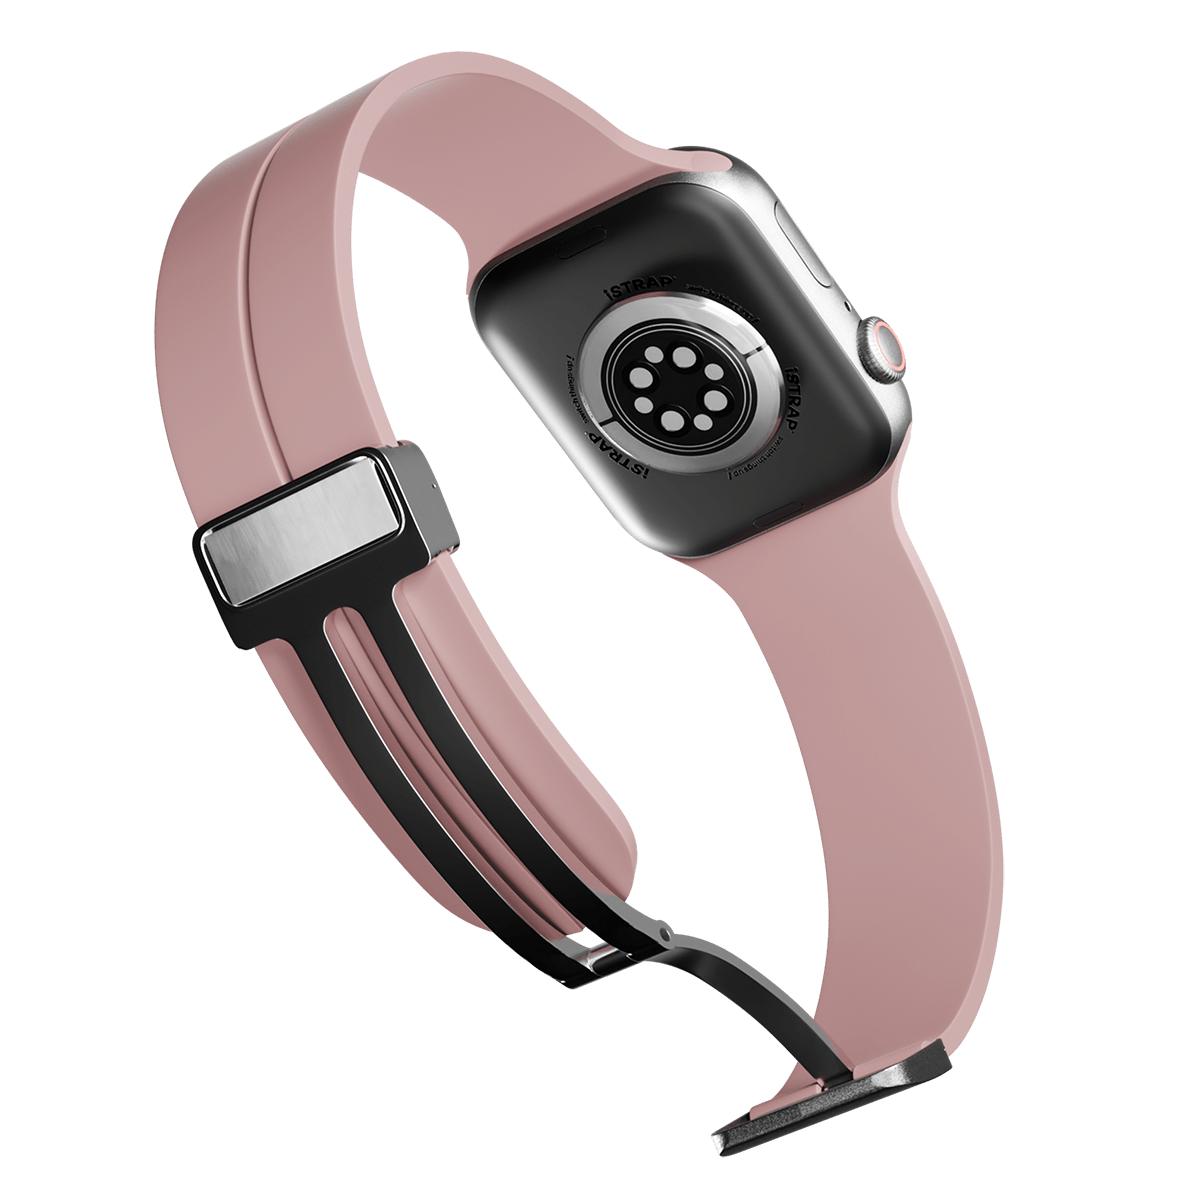 Pink Sand D-Buckle Sport Band for Apple Watch